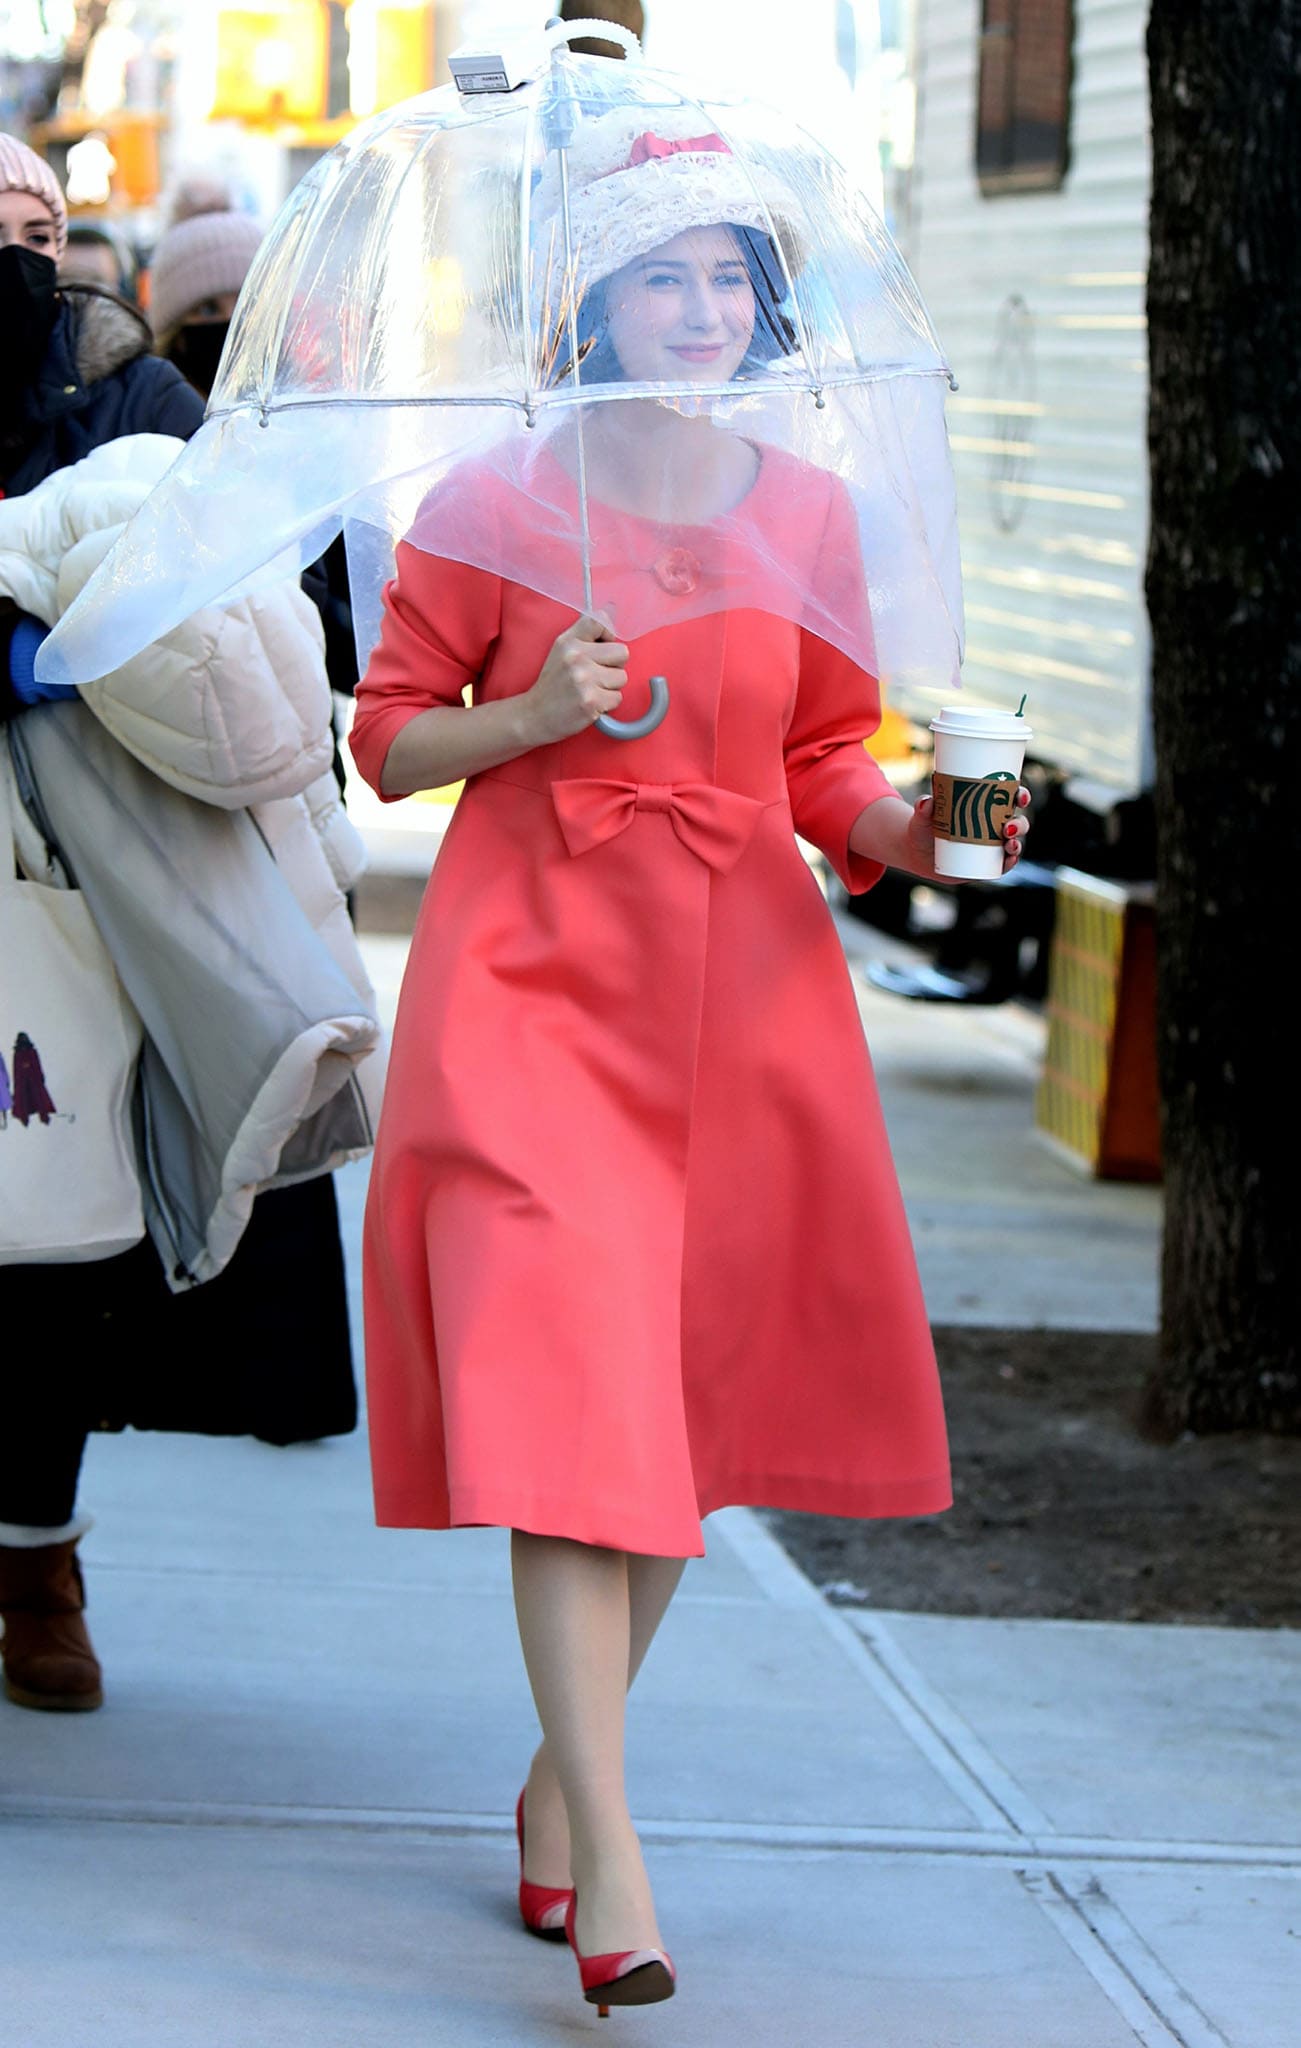 Rachel Brosnahan wearing a vintage pink coat dress with a lace hat on The Marvelous Mrs. Maisel set on March 2, 2021